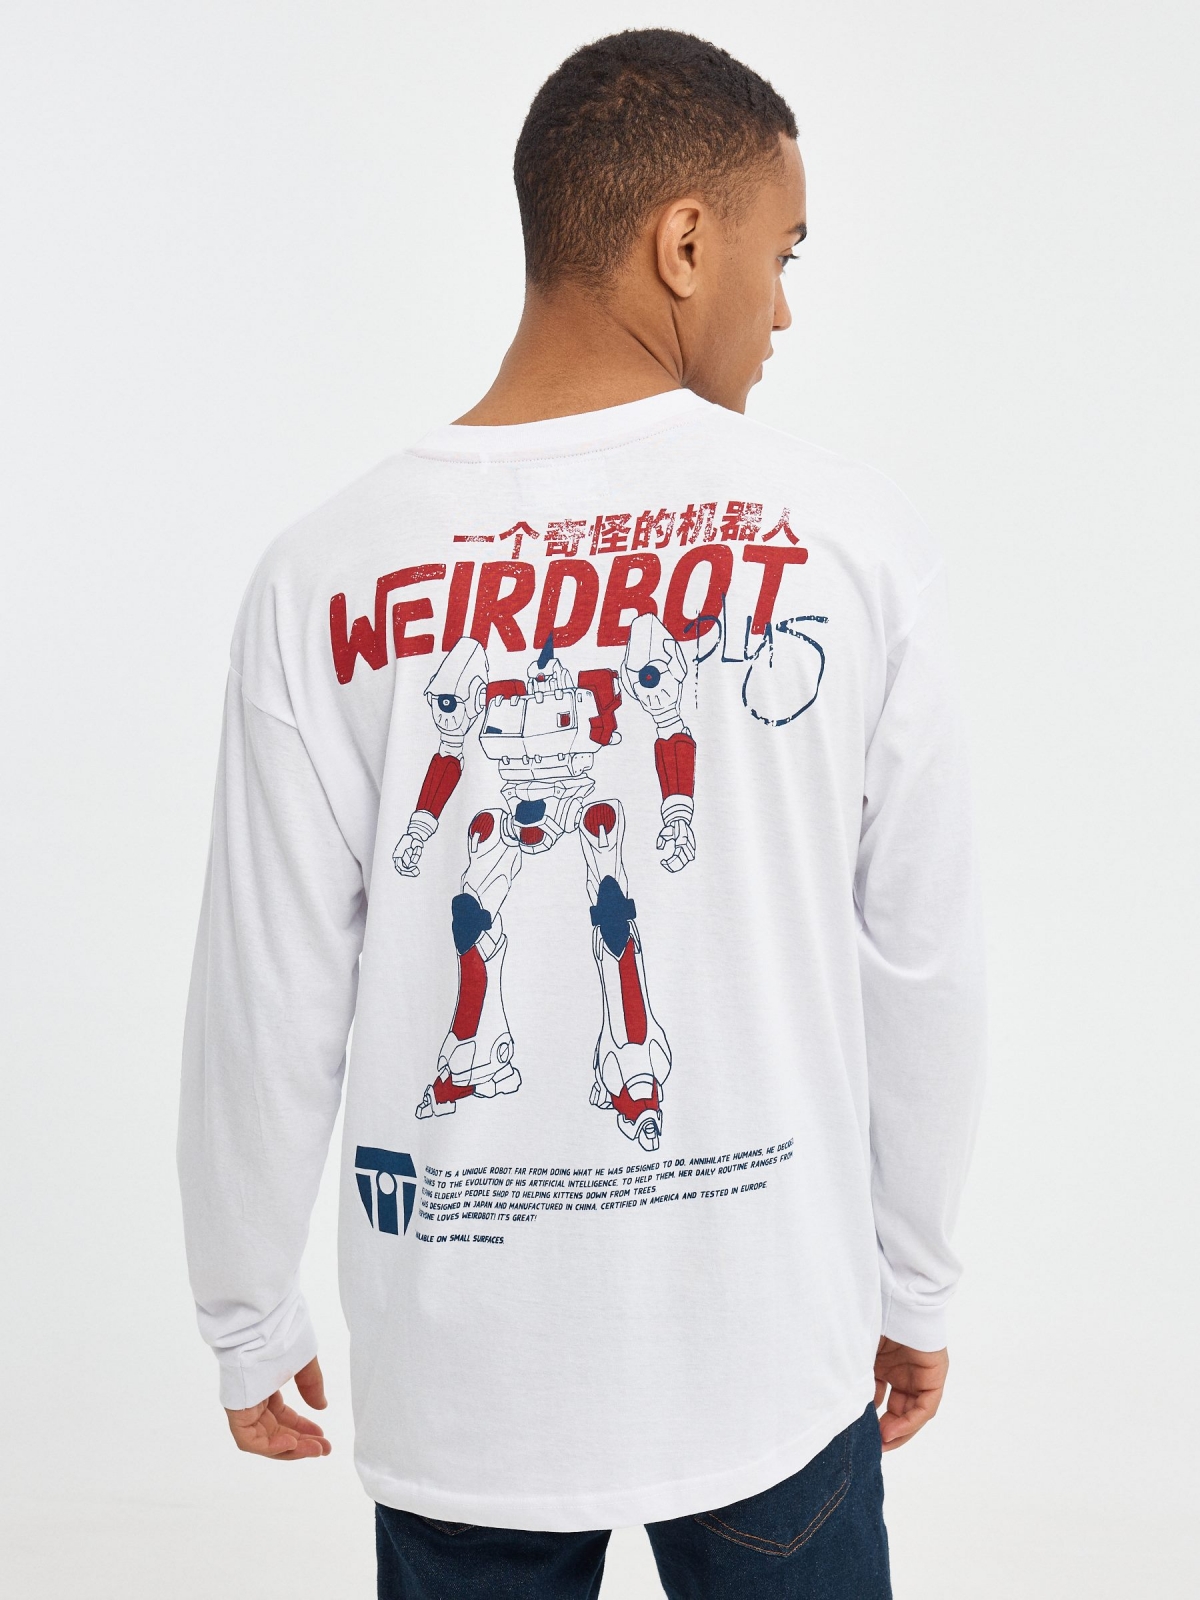 The Weird Robot T-shirt white middle back view